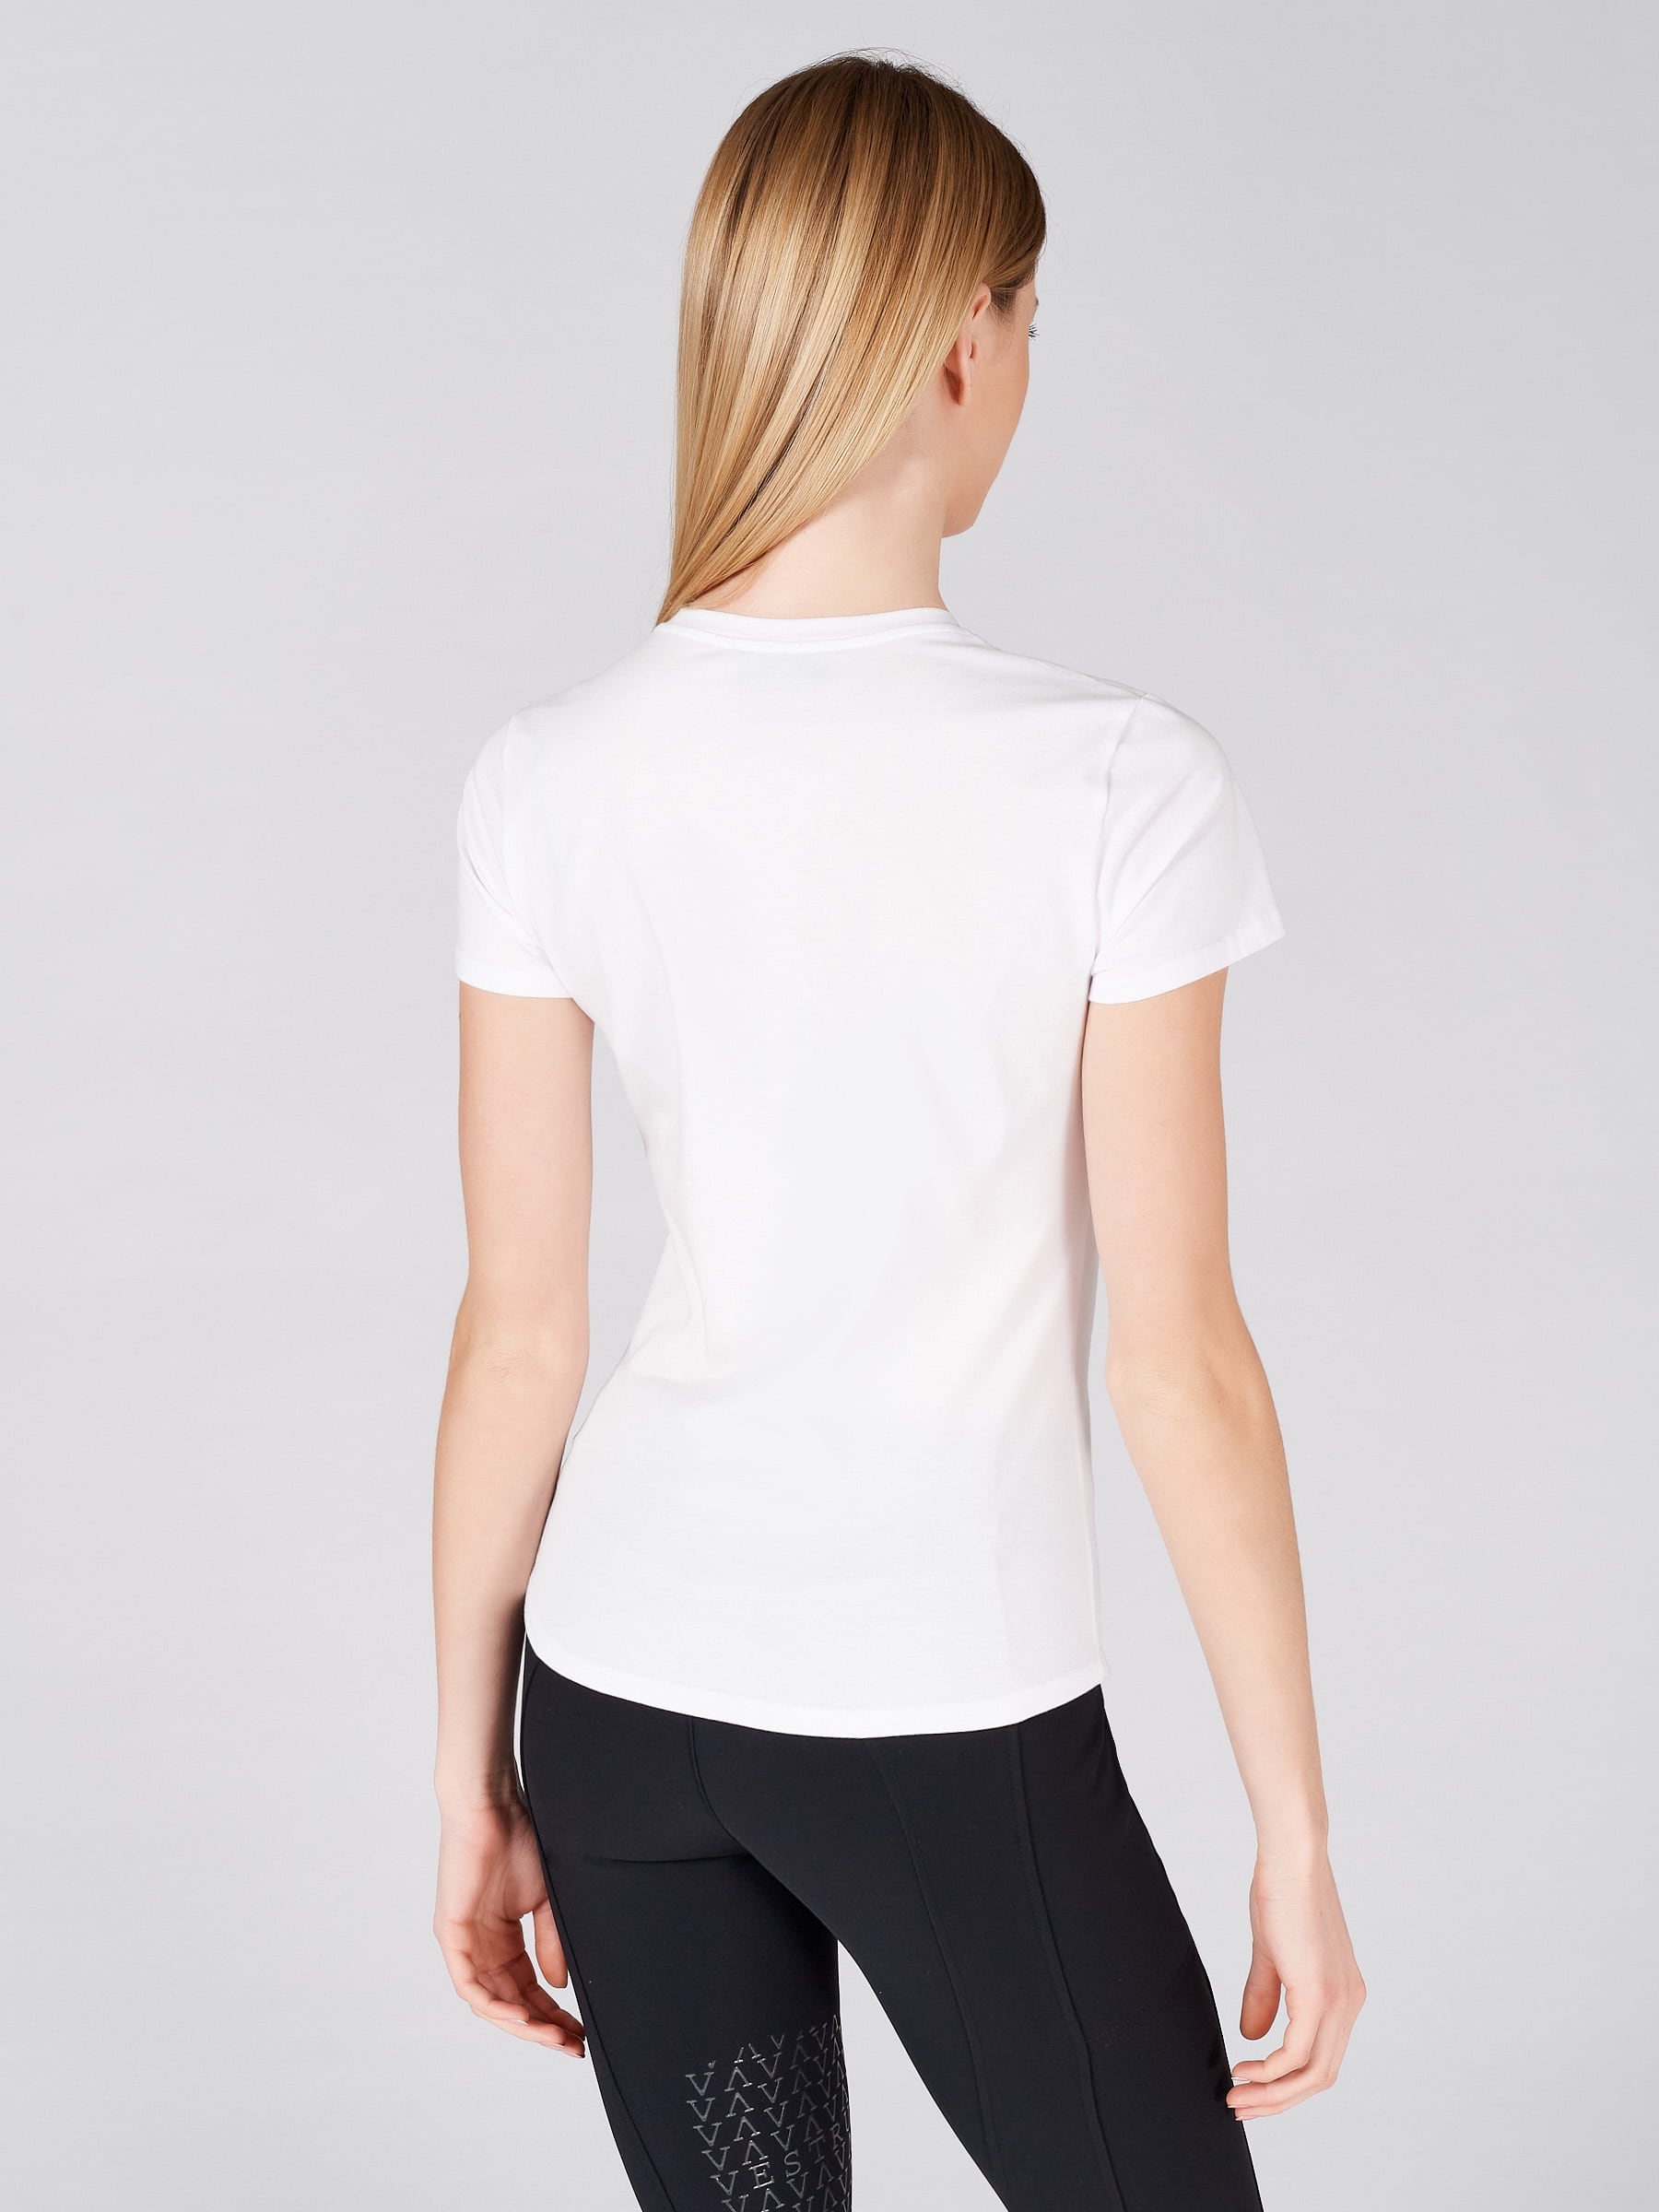 MANILA WOMEN'S T-SHIRT WITH BLACK AND GOLD EQUESTRIAN DETAILS - Vestrum